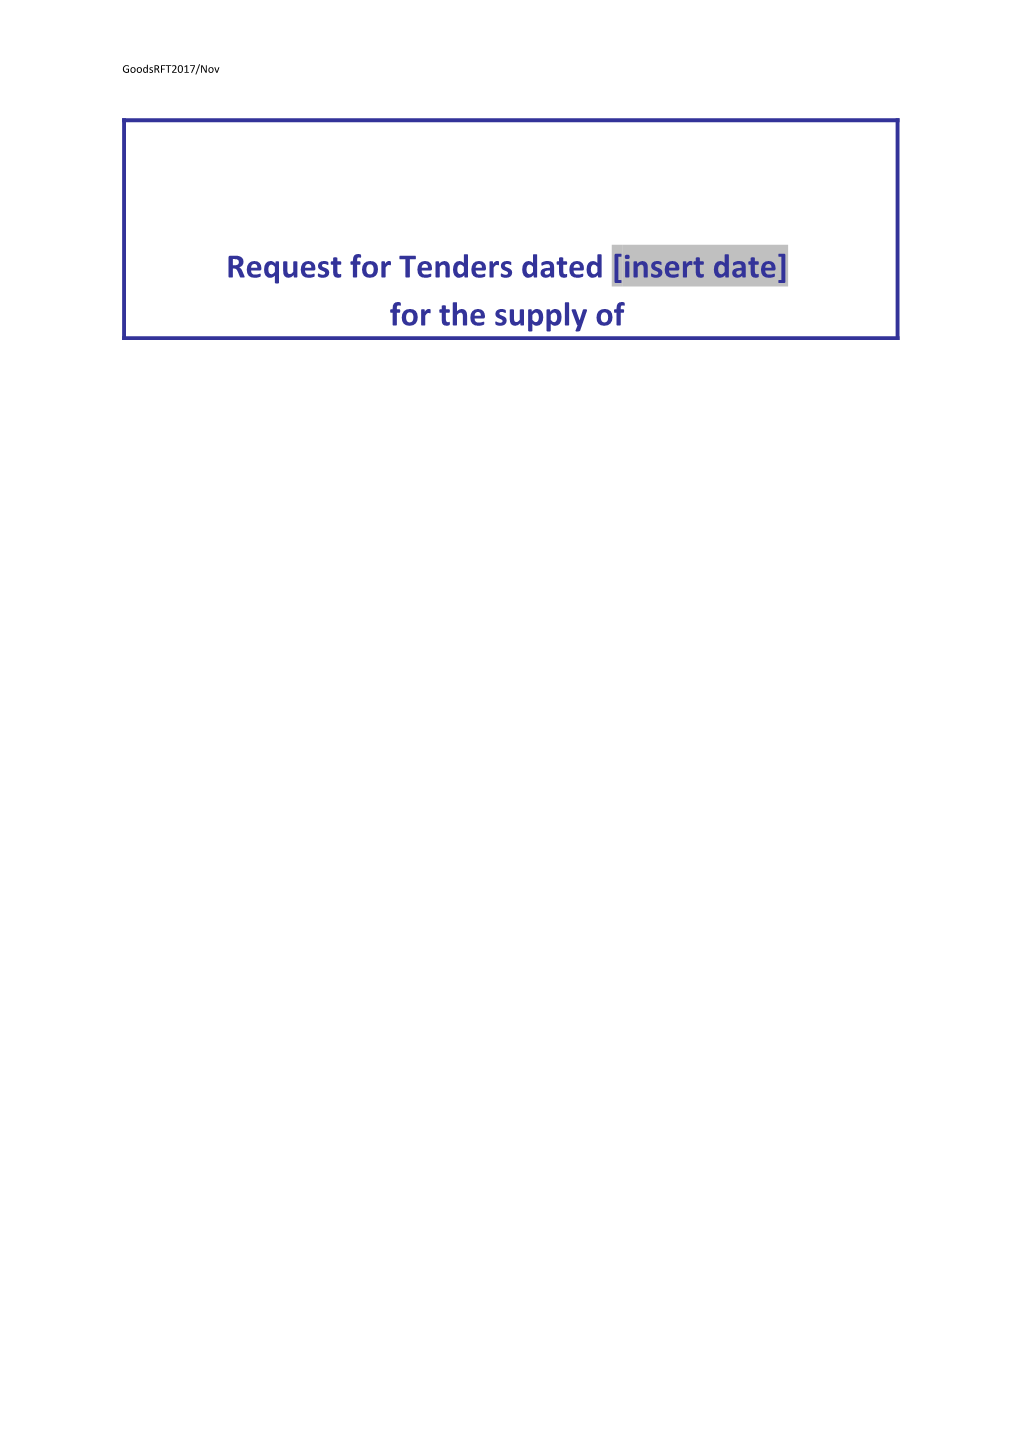 Request for Tenders Dated Insert Date for the Supply Of